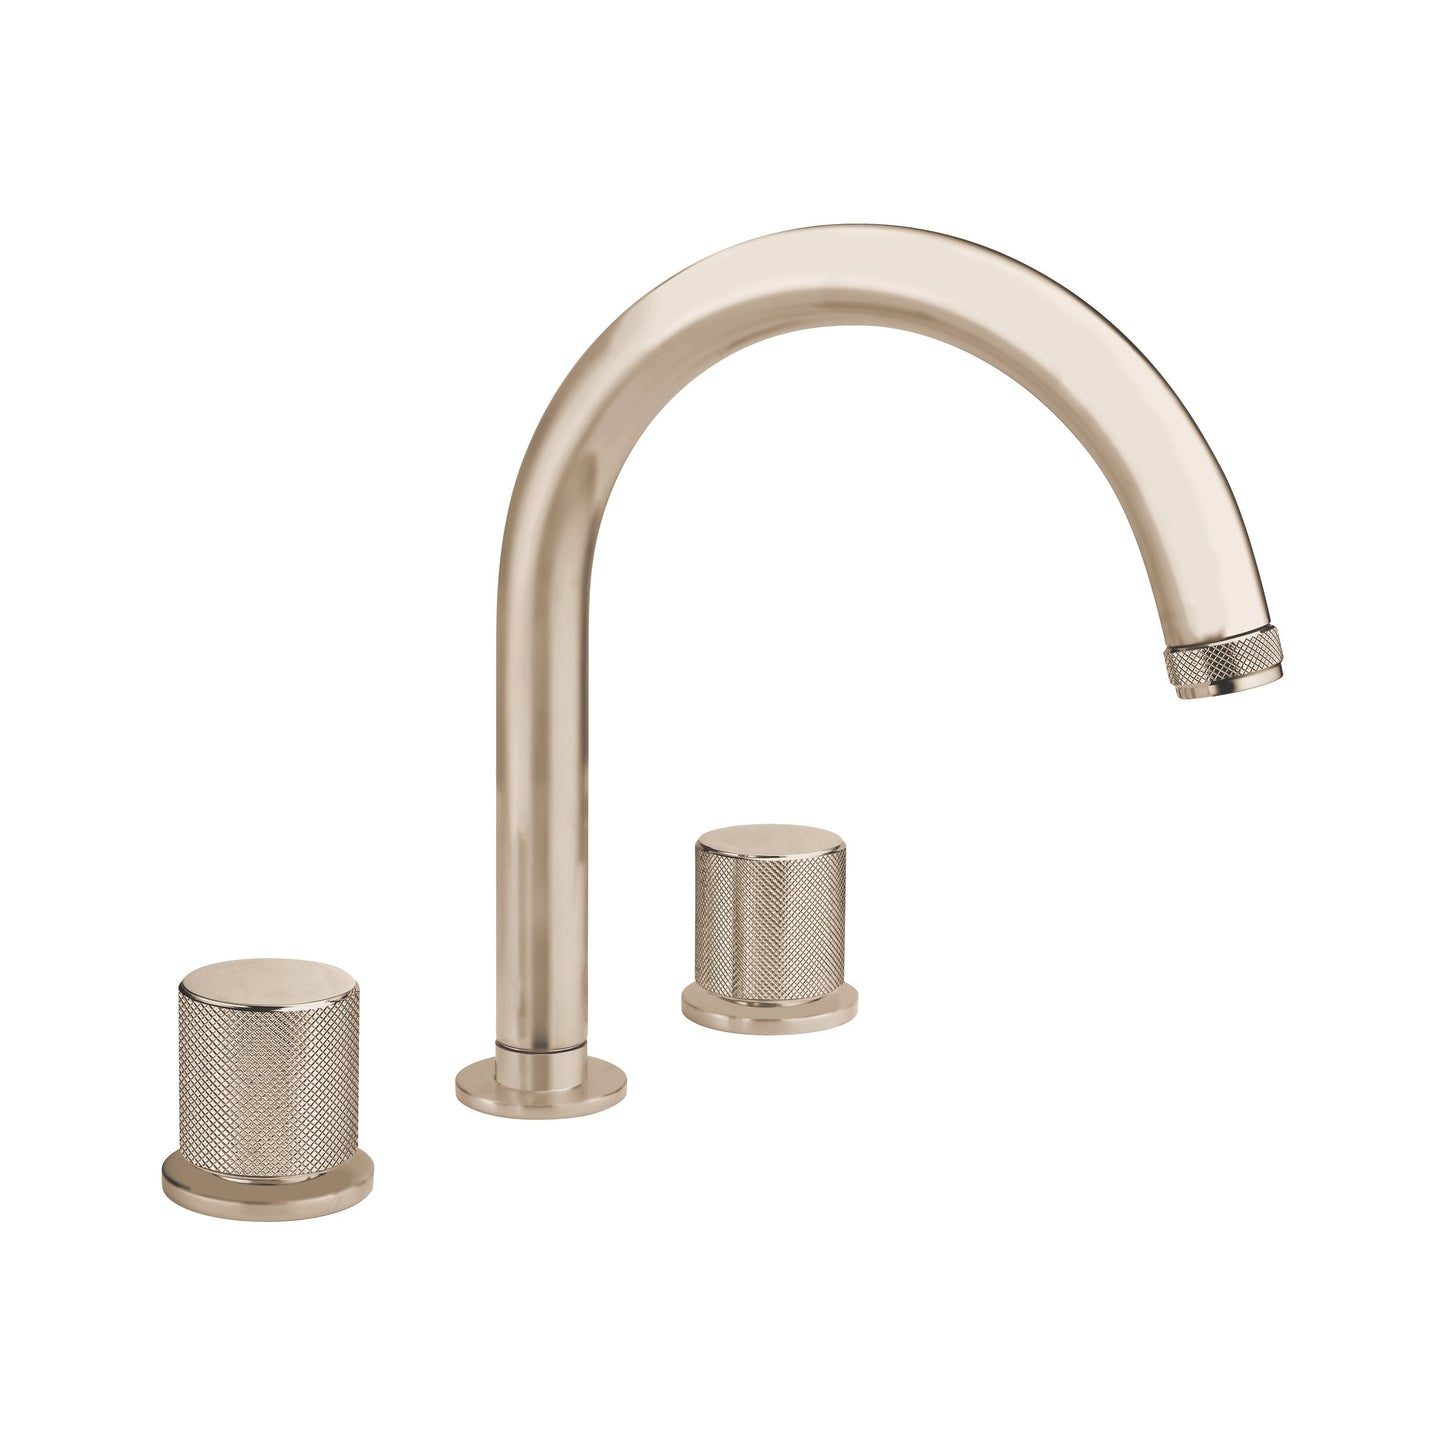 Aquadesign Products Widespread Lav – Drain Included (Contempo R1086) - Brushed Nickel